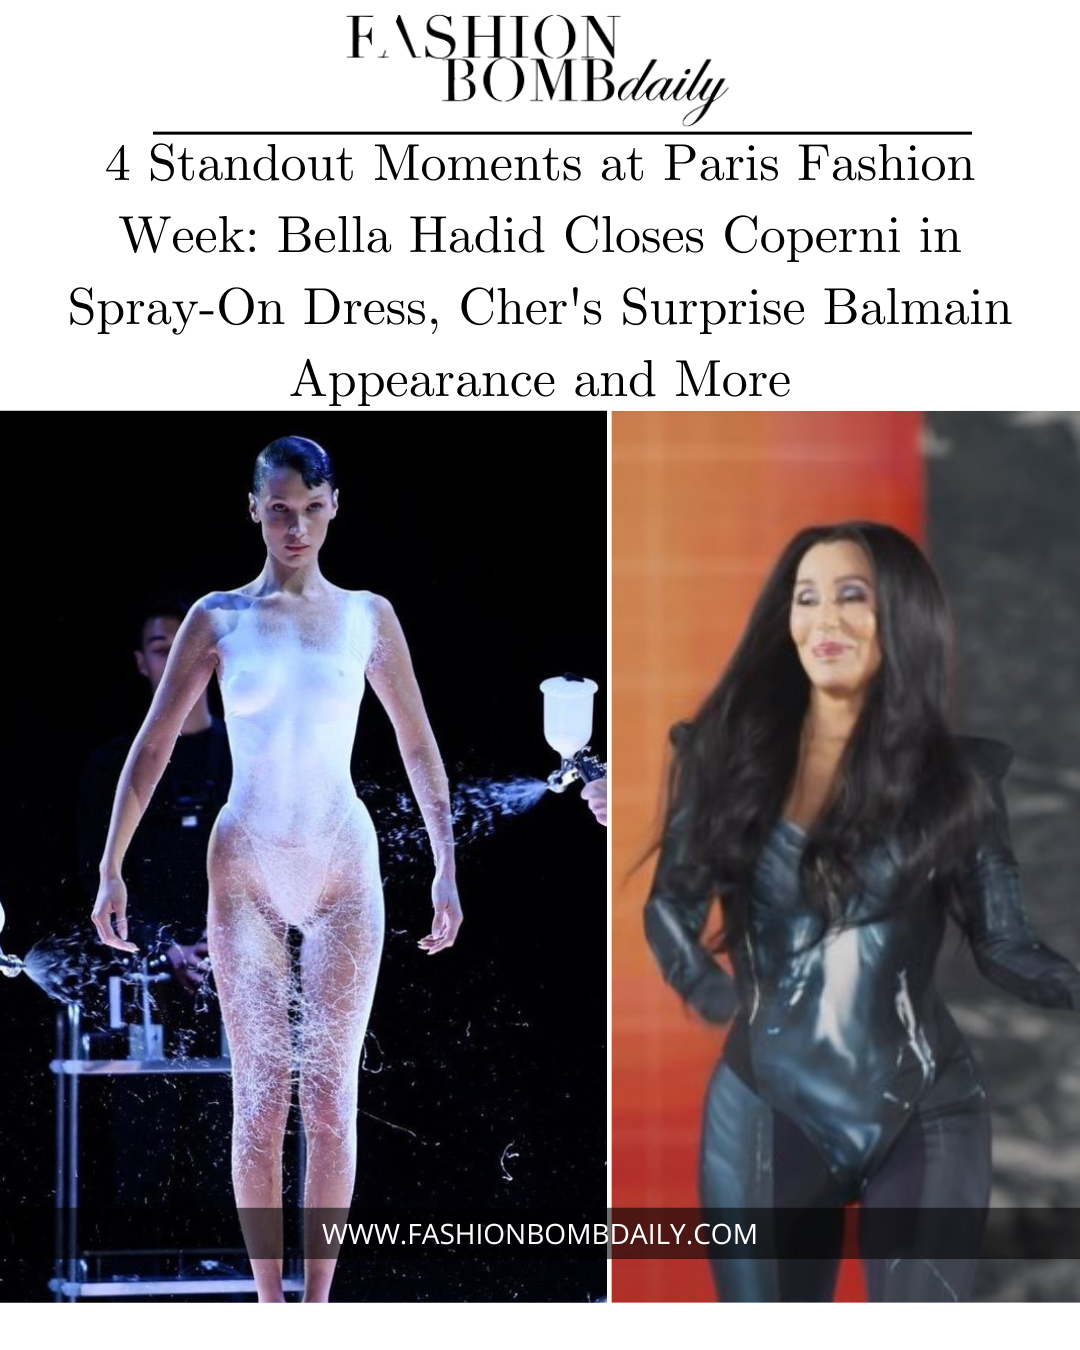 Bella-Hadid-closes-out-Koperni-in-a-spray-on-dress-Chers.png